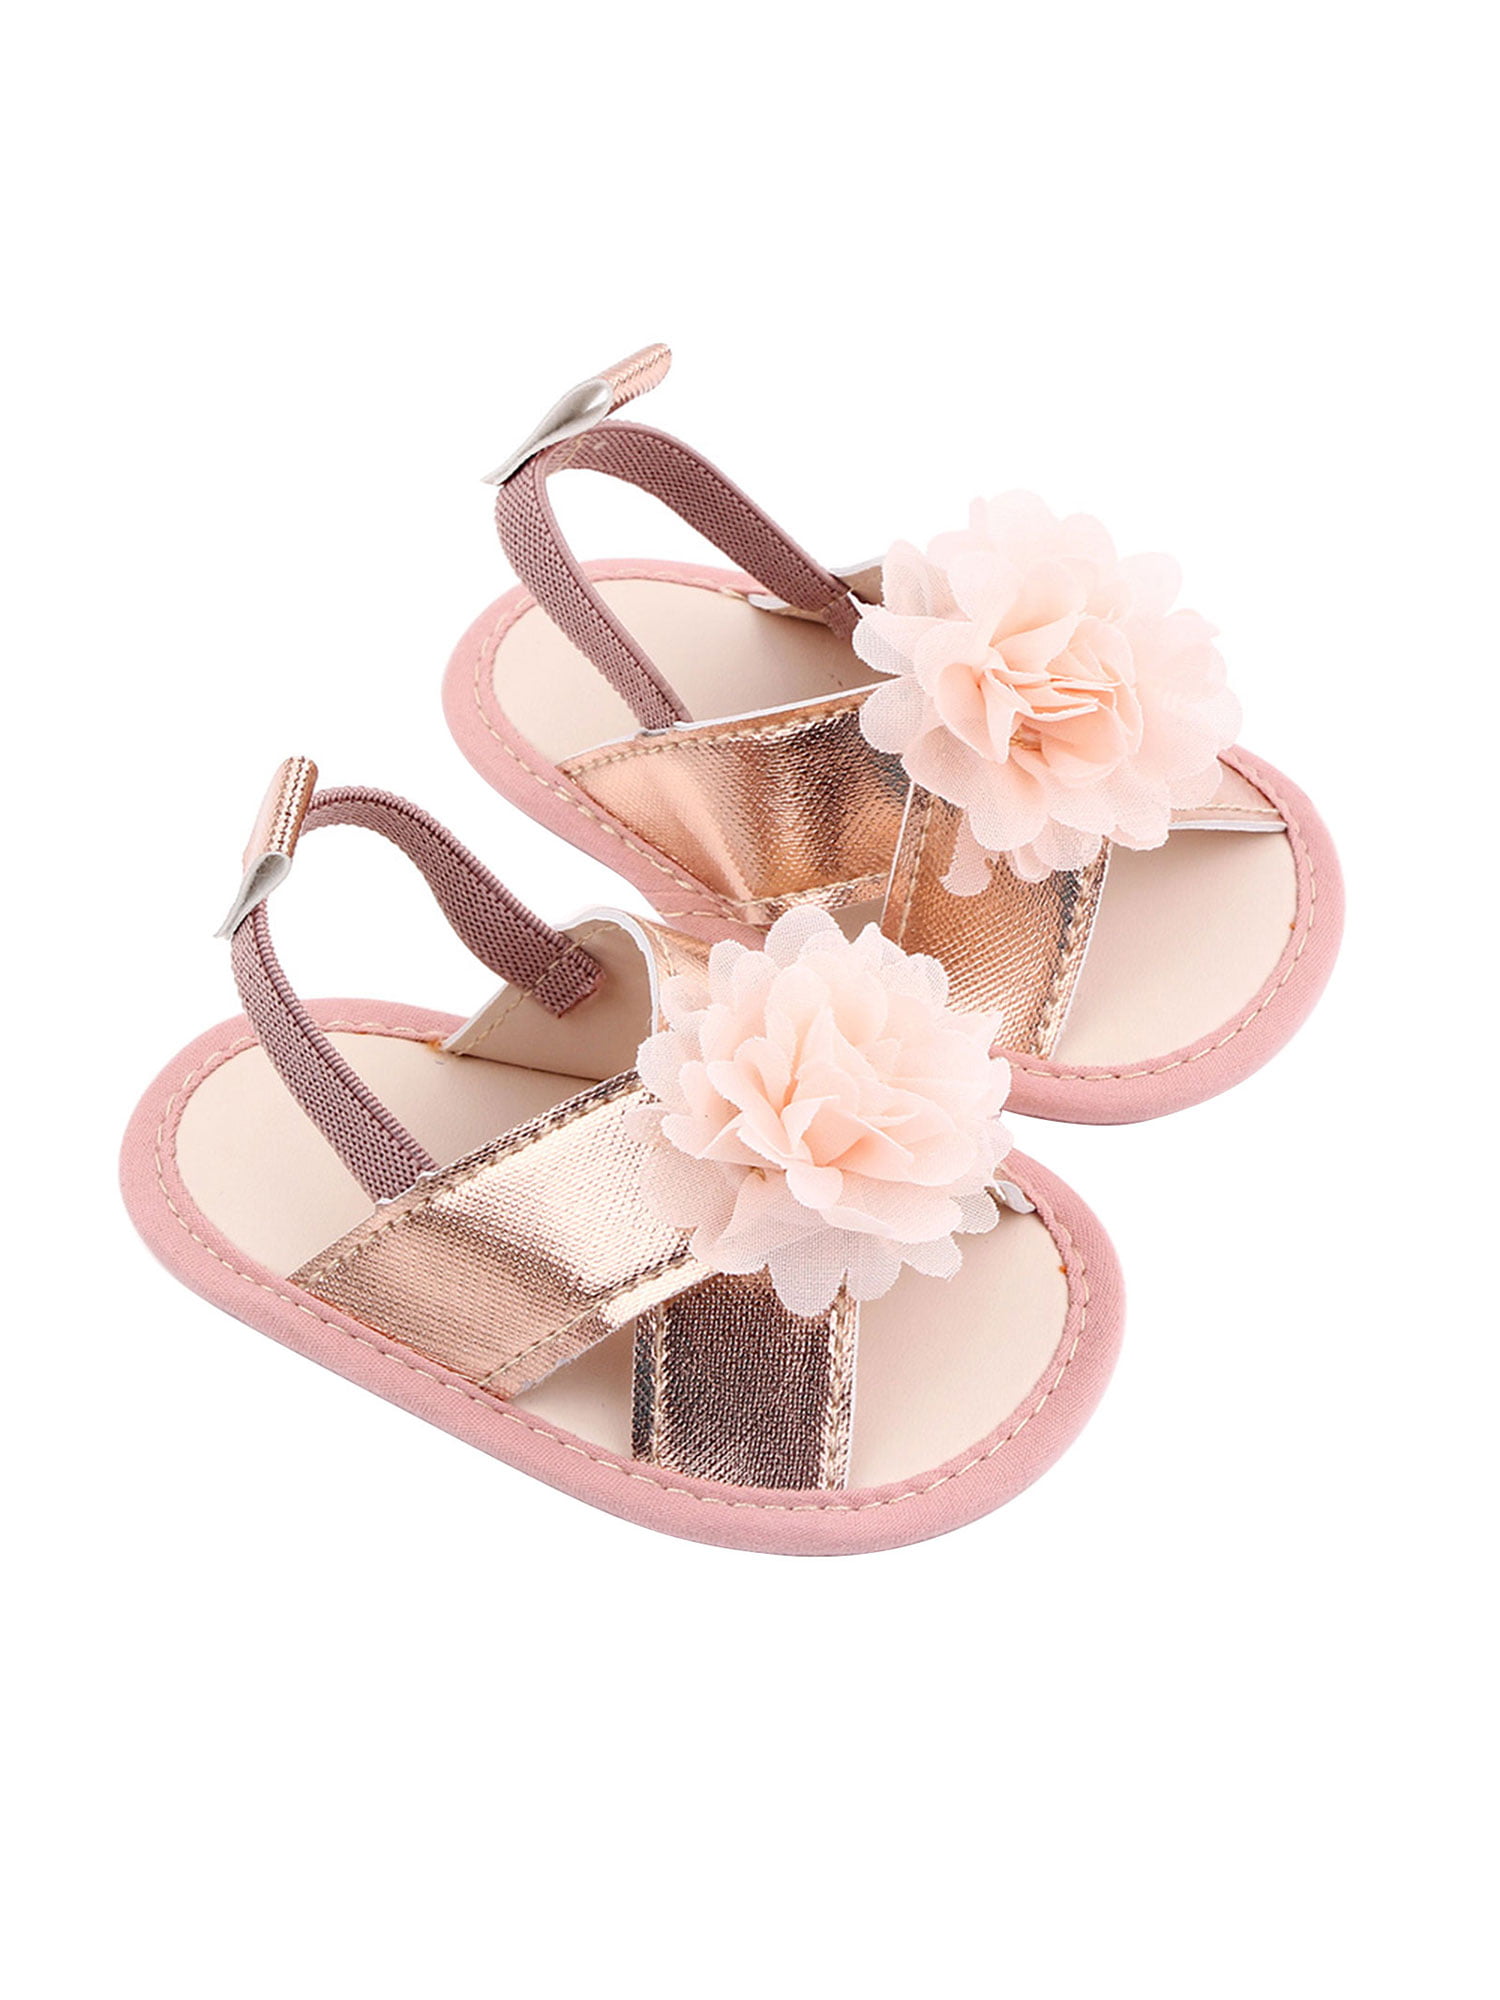 Summer Flower Sandals Baby Girls Shoes Soft Sole for Infants Toddlers First Walkers 